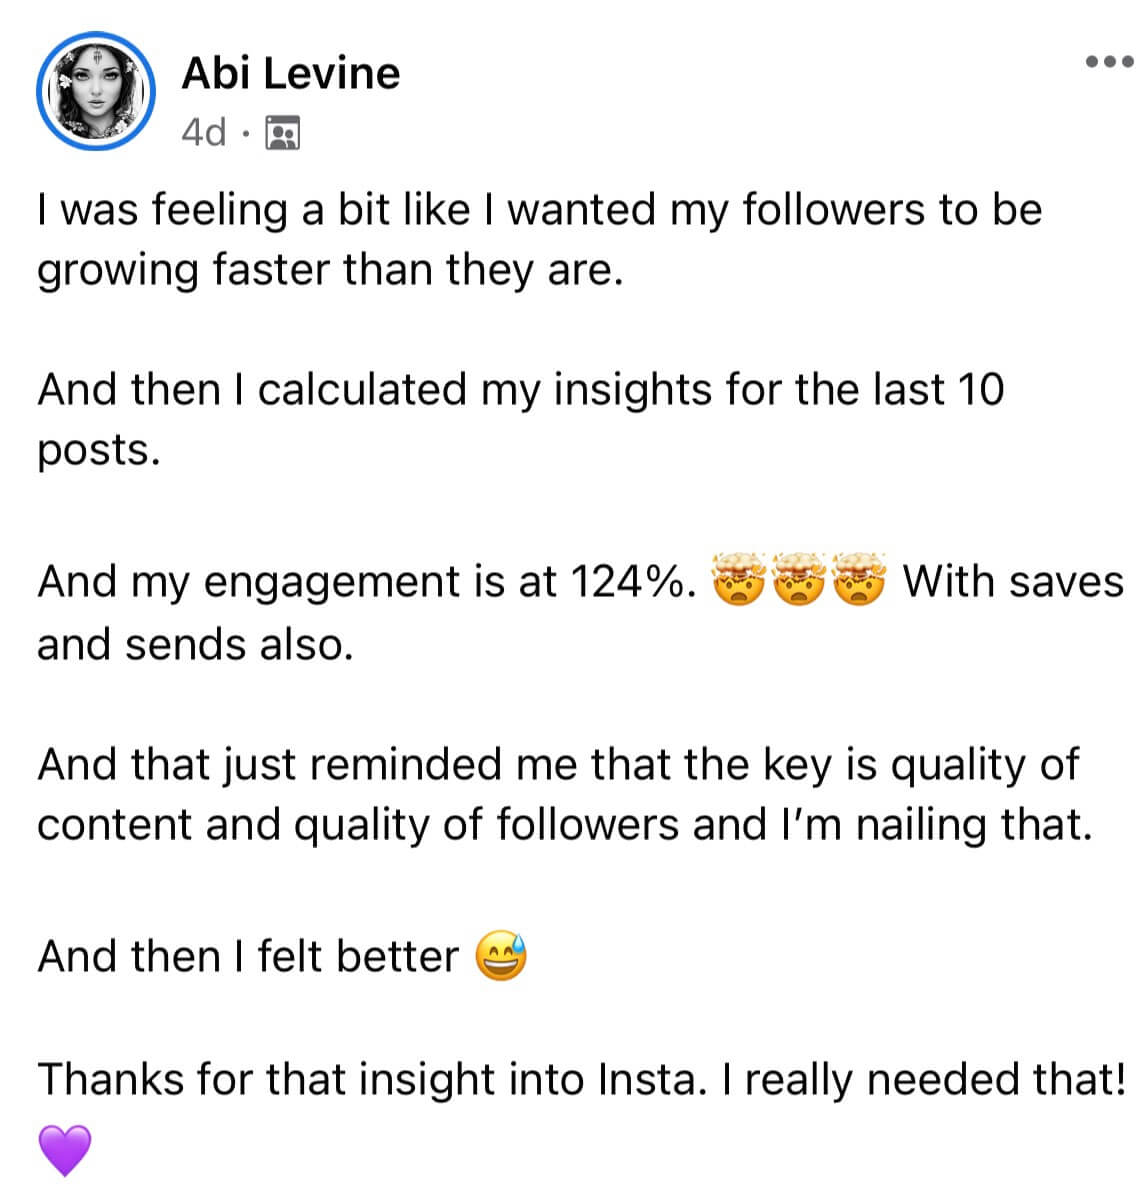 A screenshot of a Facebook comment from Abi Levine that says, "I was feeling a bit like I wanted my followers to be growing faster than they are. And then I calculated my insights for the last 10 posts. And my engagement is at 124%. With saves and sends also. And that just reminded me that the key is quality of content and quality of followers and I'm nailing that. And then I felt better. Thanks for that insight into Insta. I really needed that!"